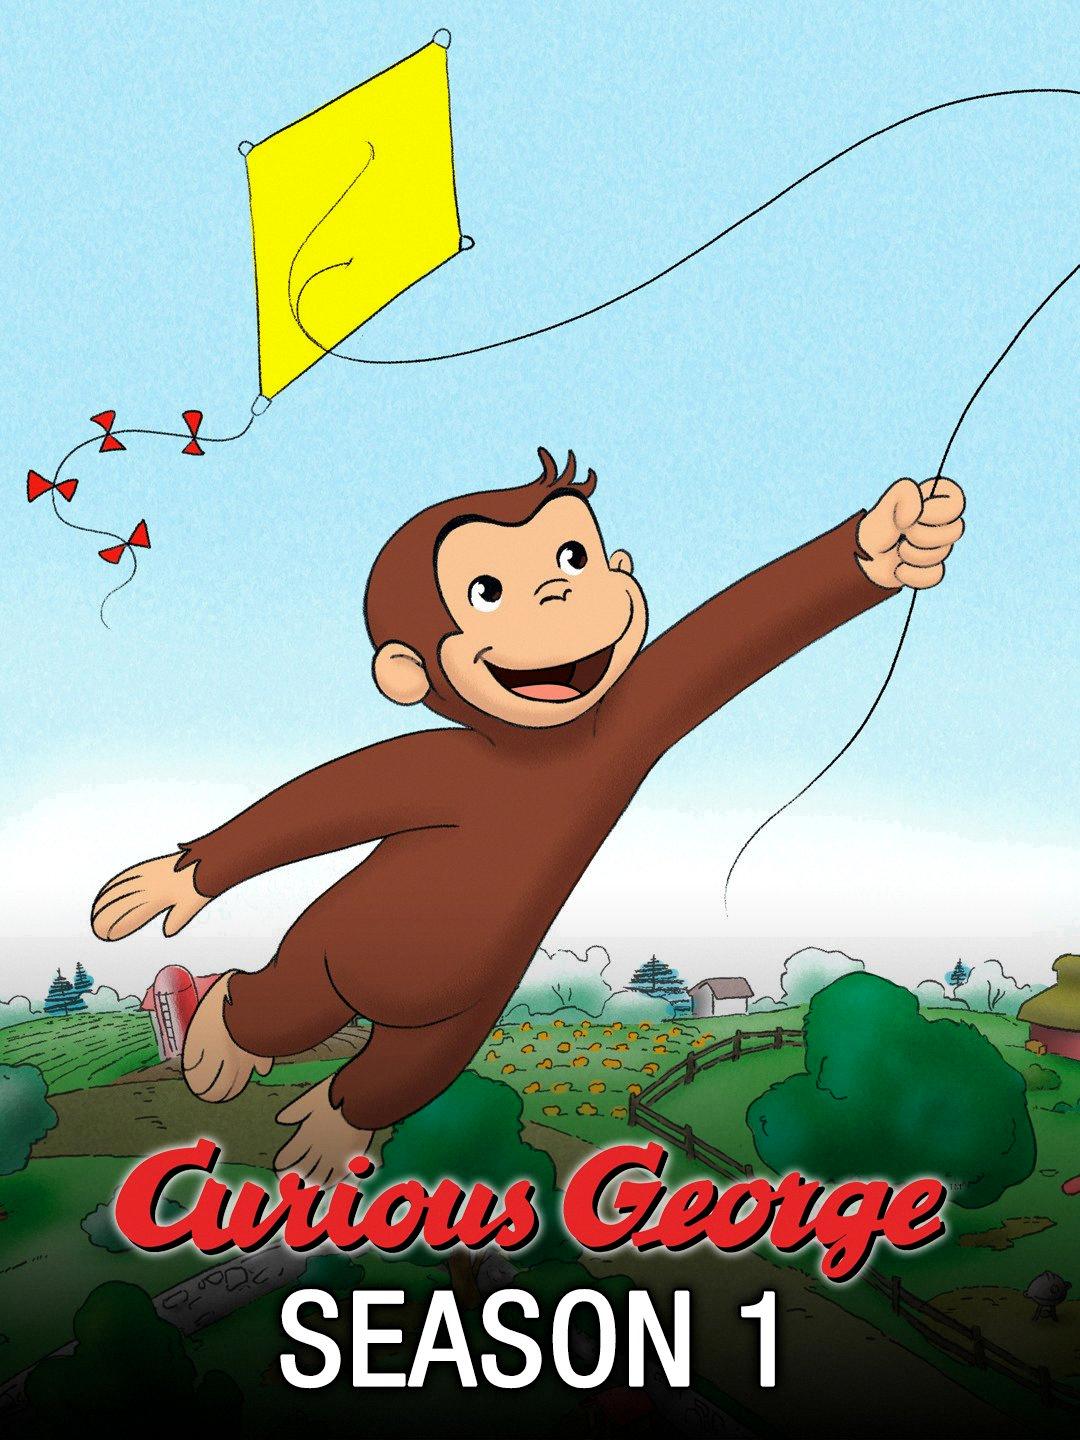 curious george cancelled